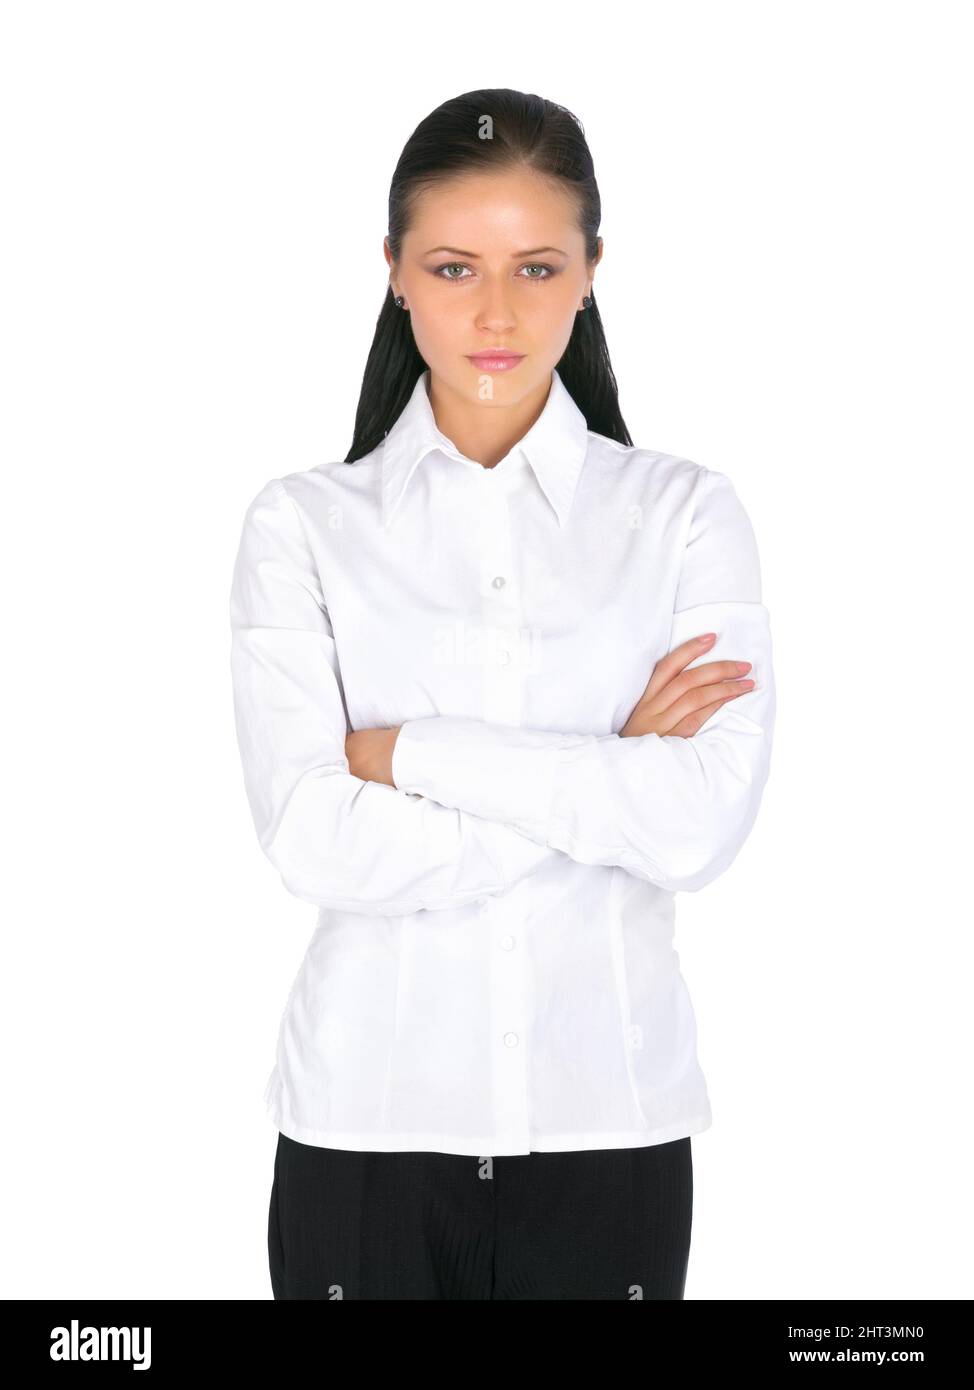 Serious about business. Portrait of an attractive businesswoman looking serious against a white background. Stock Photo